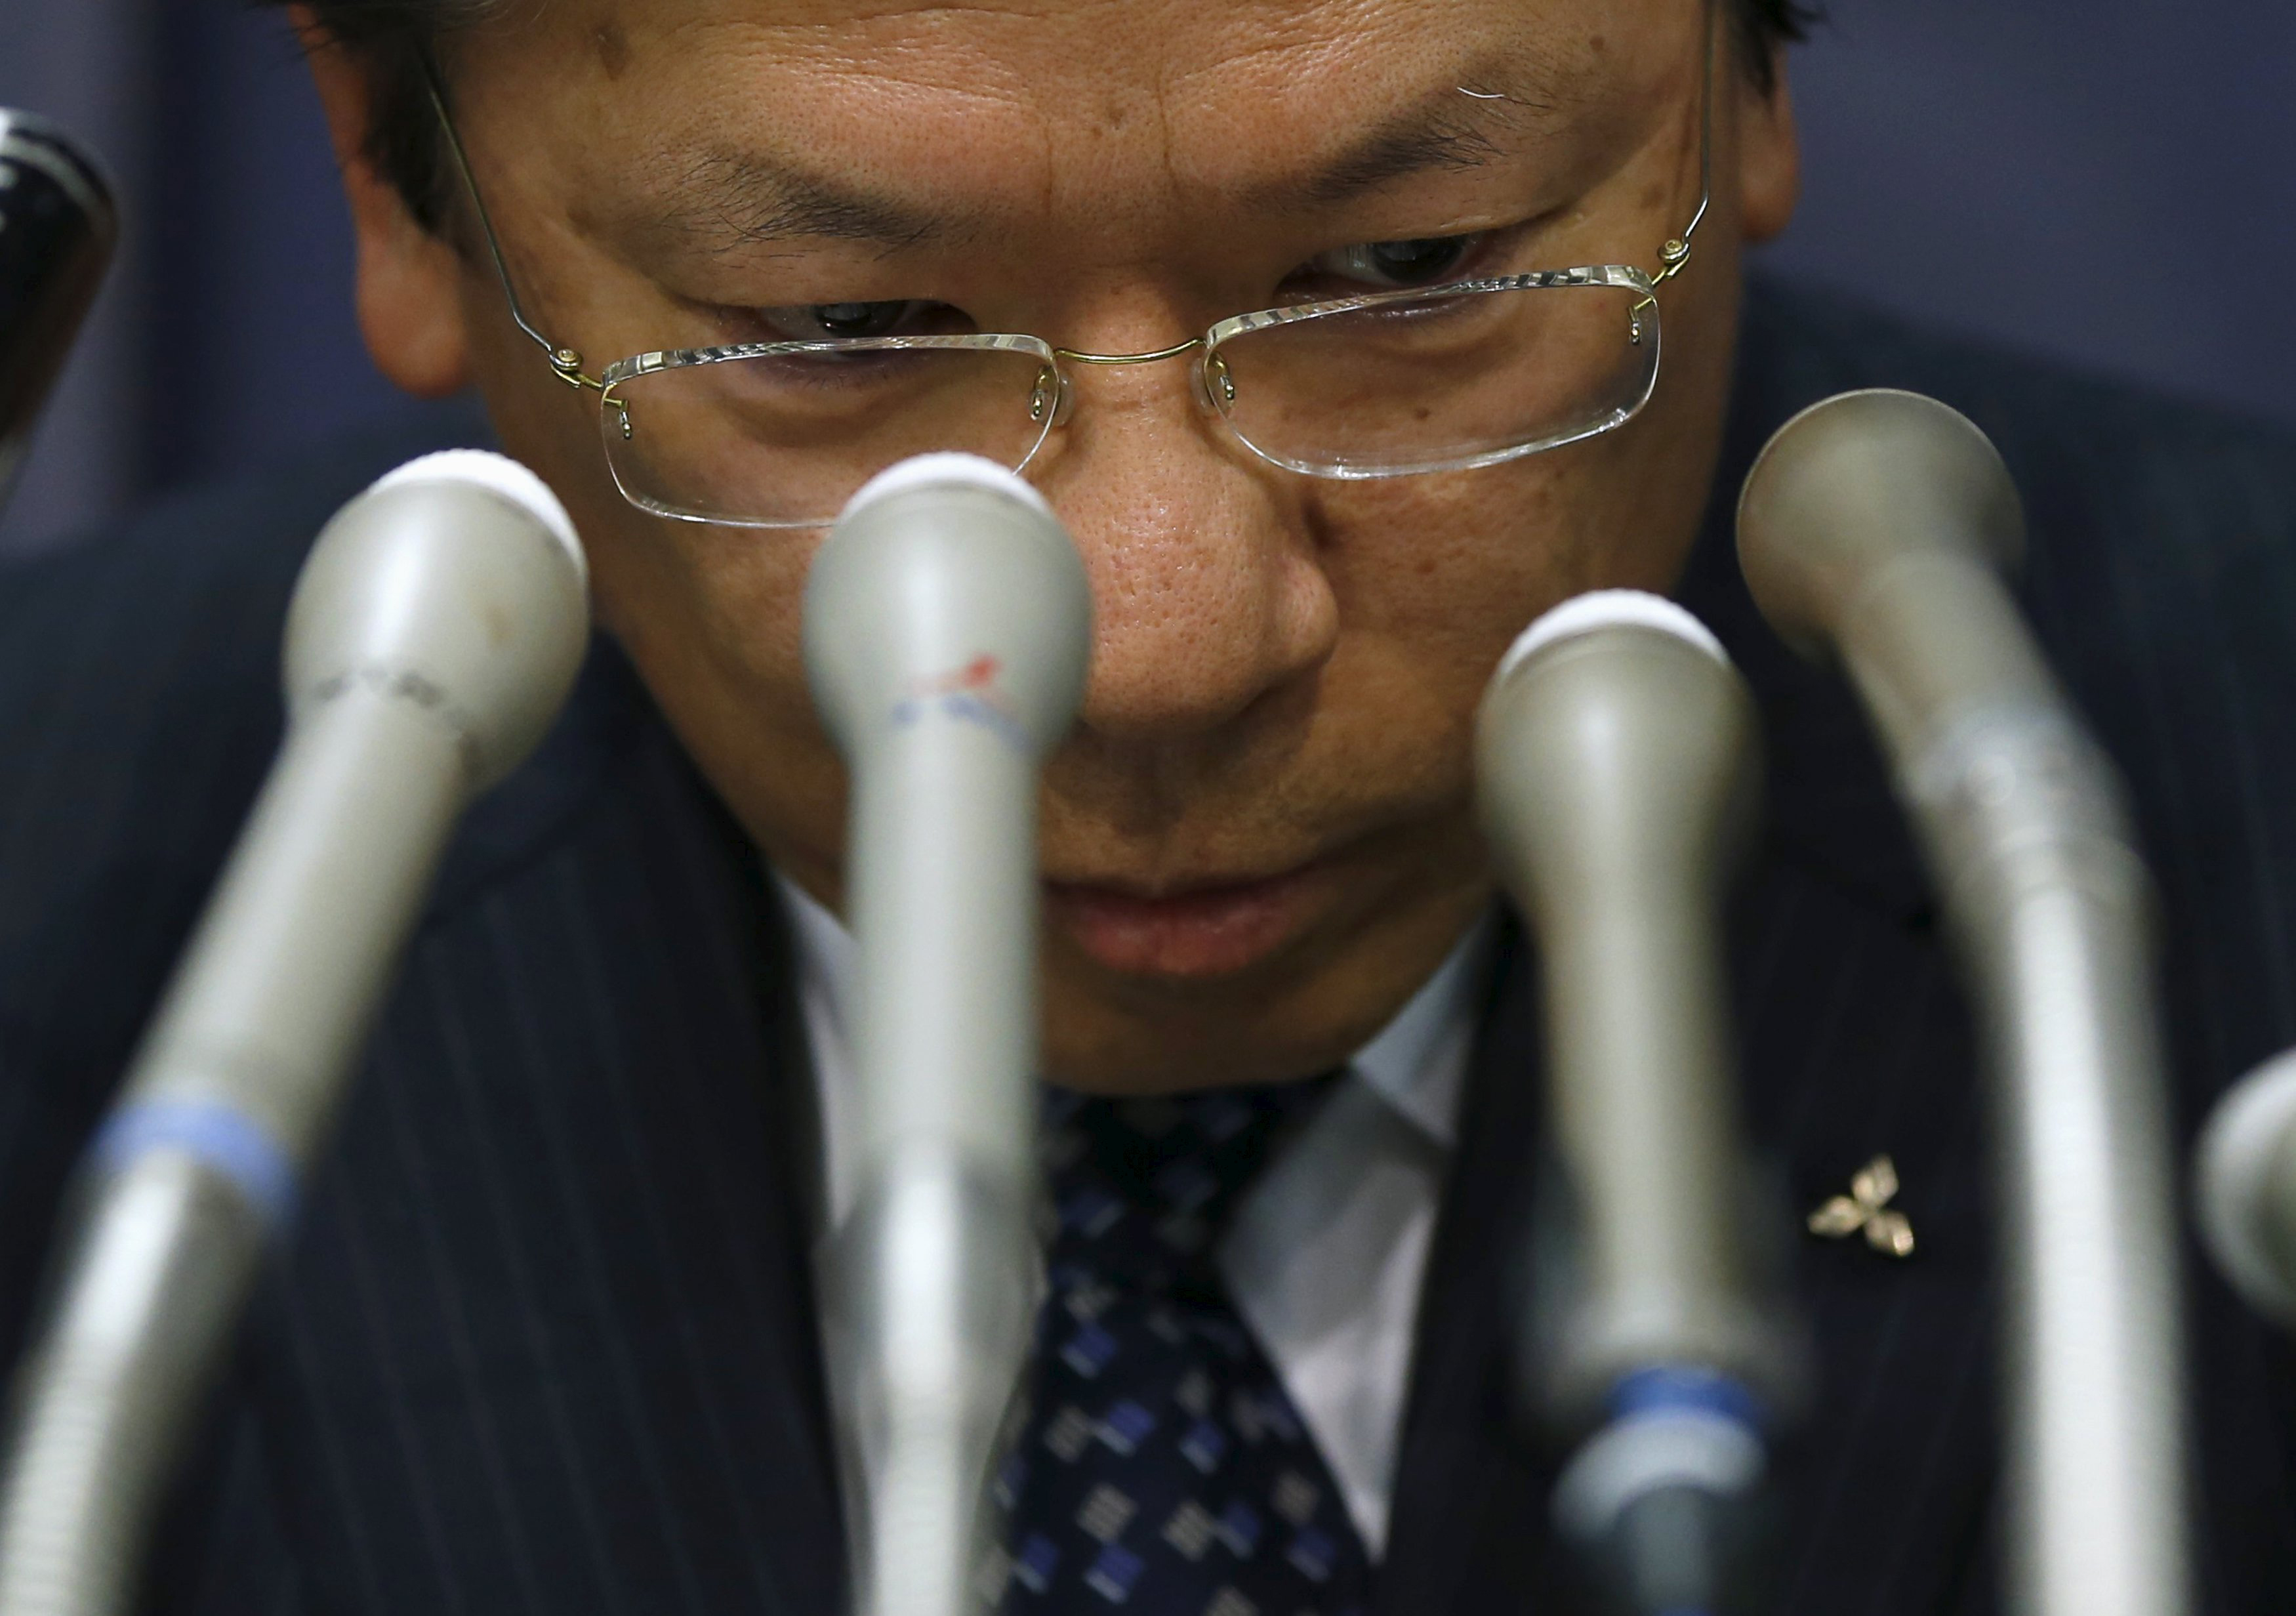 Mitsubishi Motors Corp. President Tetsuro Aikawa faces the media at a news conference Wednesday at the transport ministry over the automaker's misconduct related to fuel-efficiency tests. | REUTERS